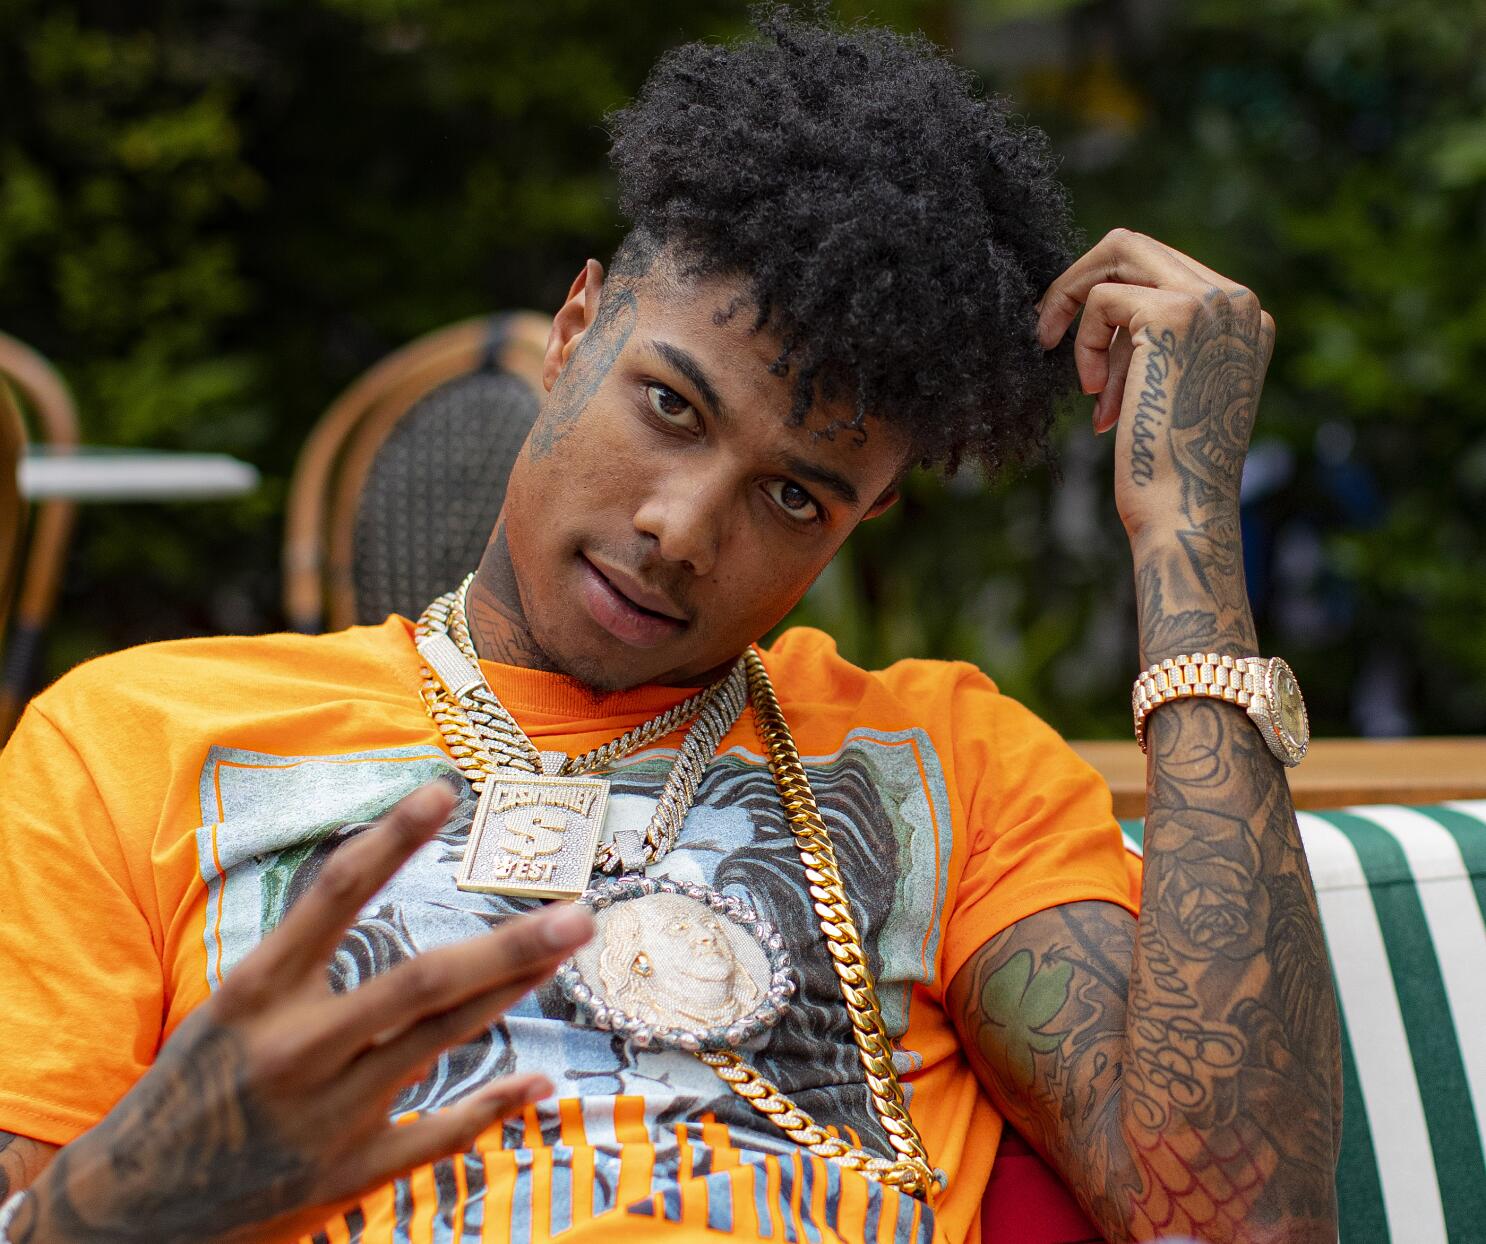 L.A. rapper Blueface arrested on suspicion of attempted murder 